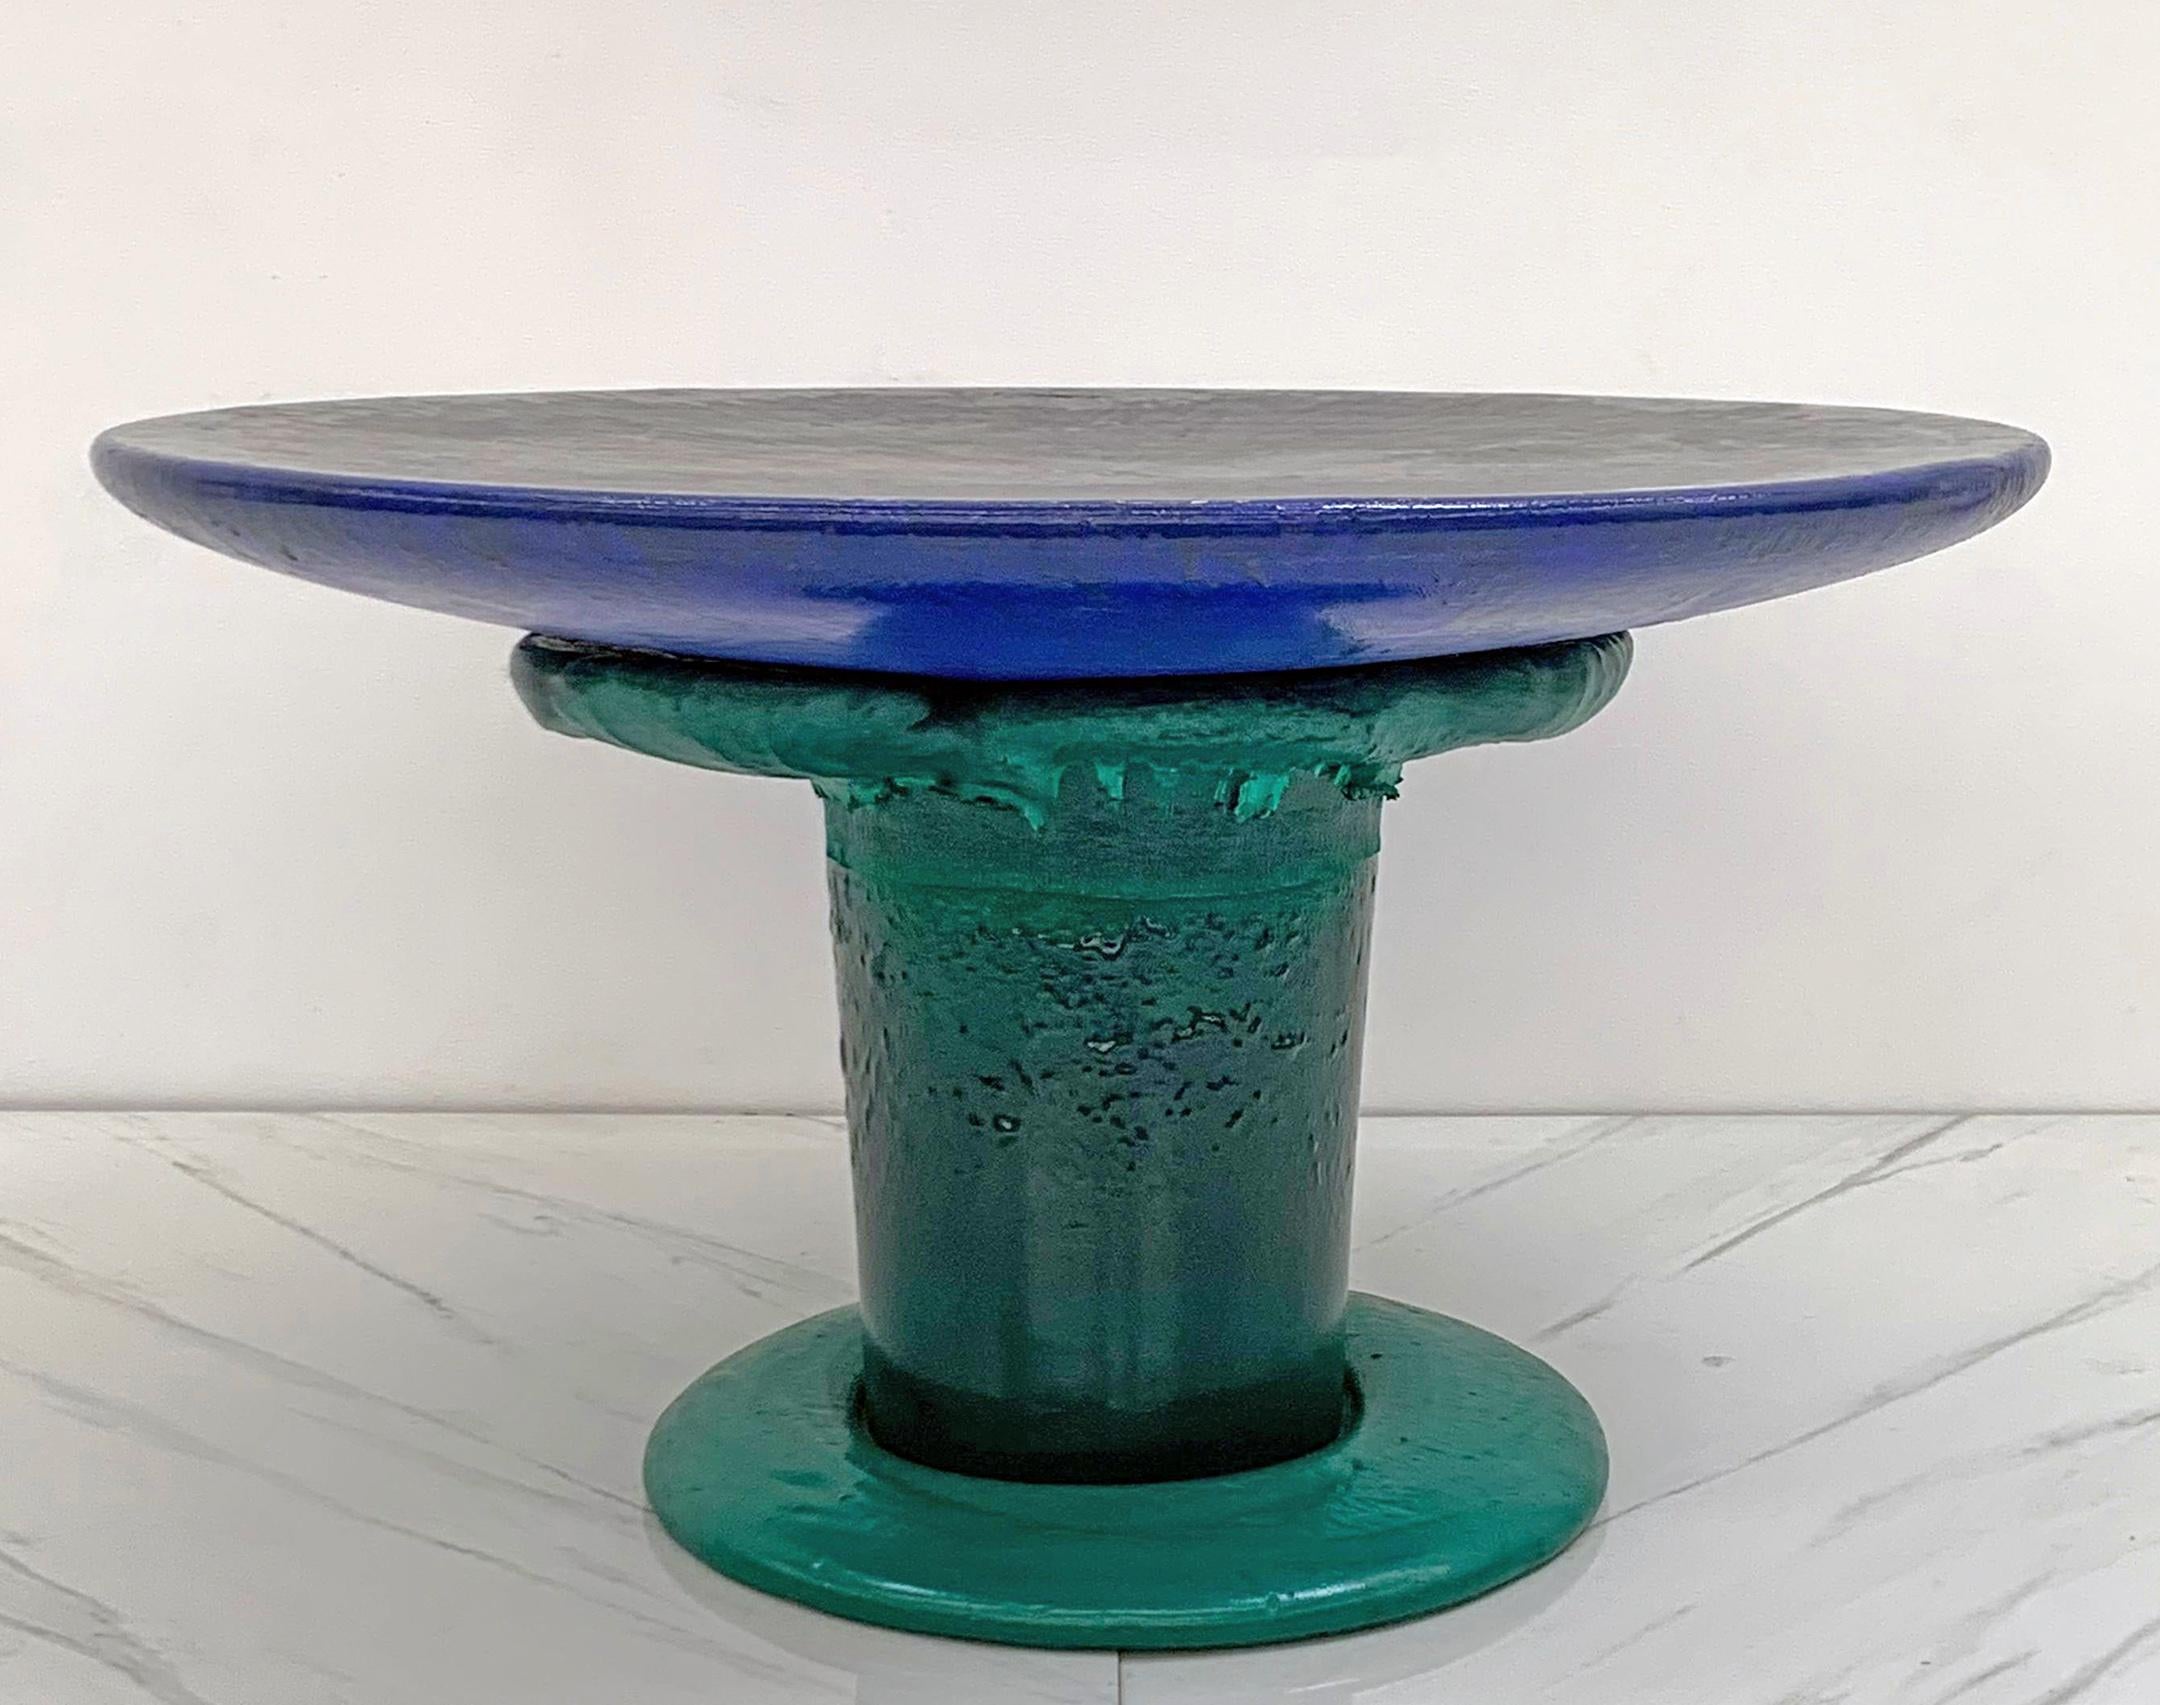 Sunburst Mushroom Table in Green and Blue, Louis Durot, 1990's For Sale 1